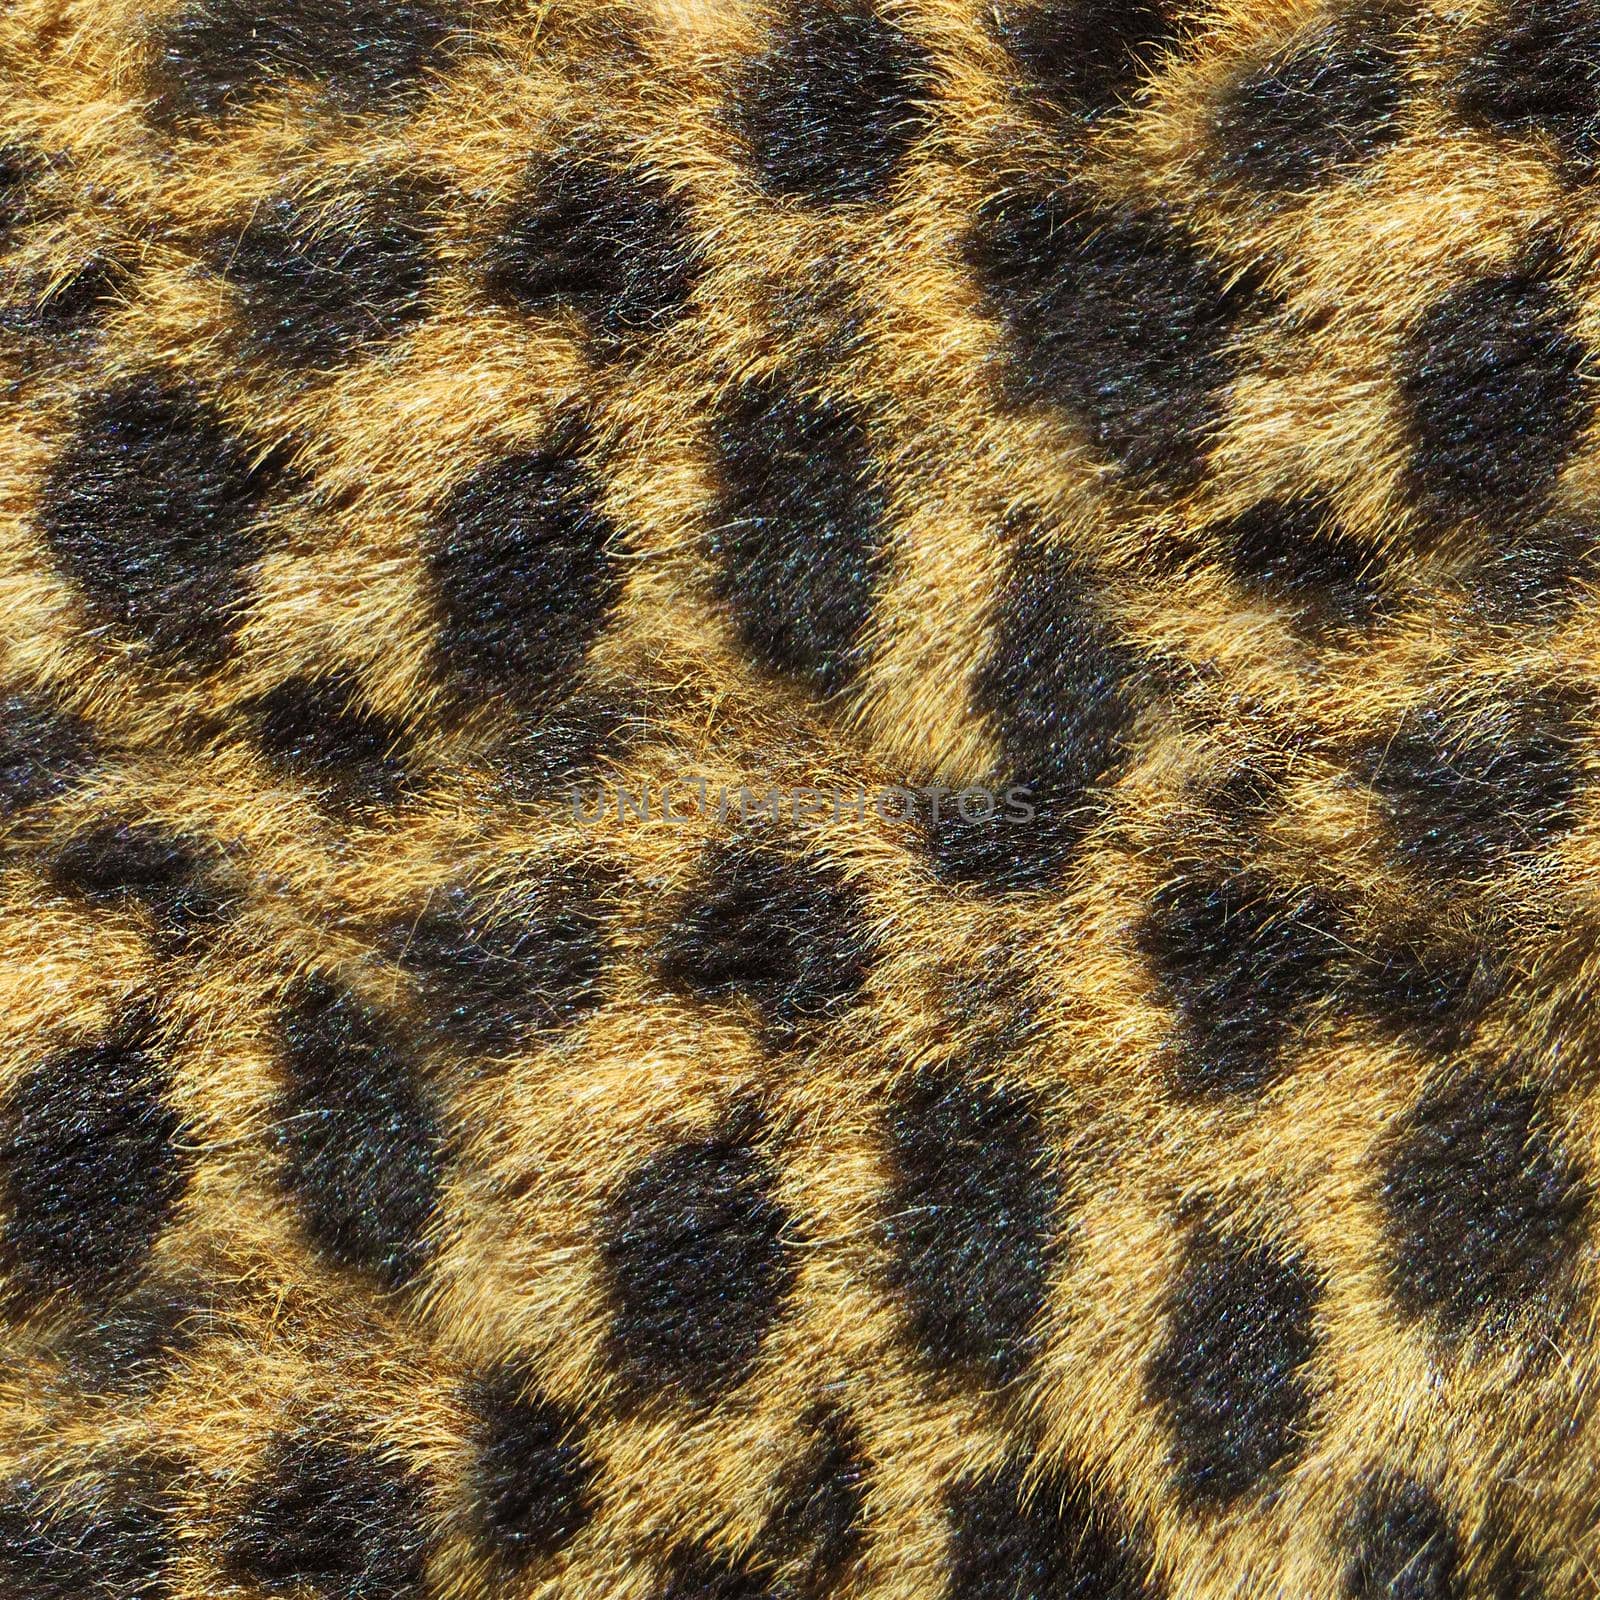 Leopard texture and pattern for background.Texture or background by Mastak80